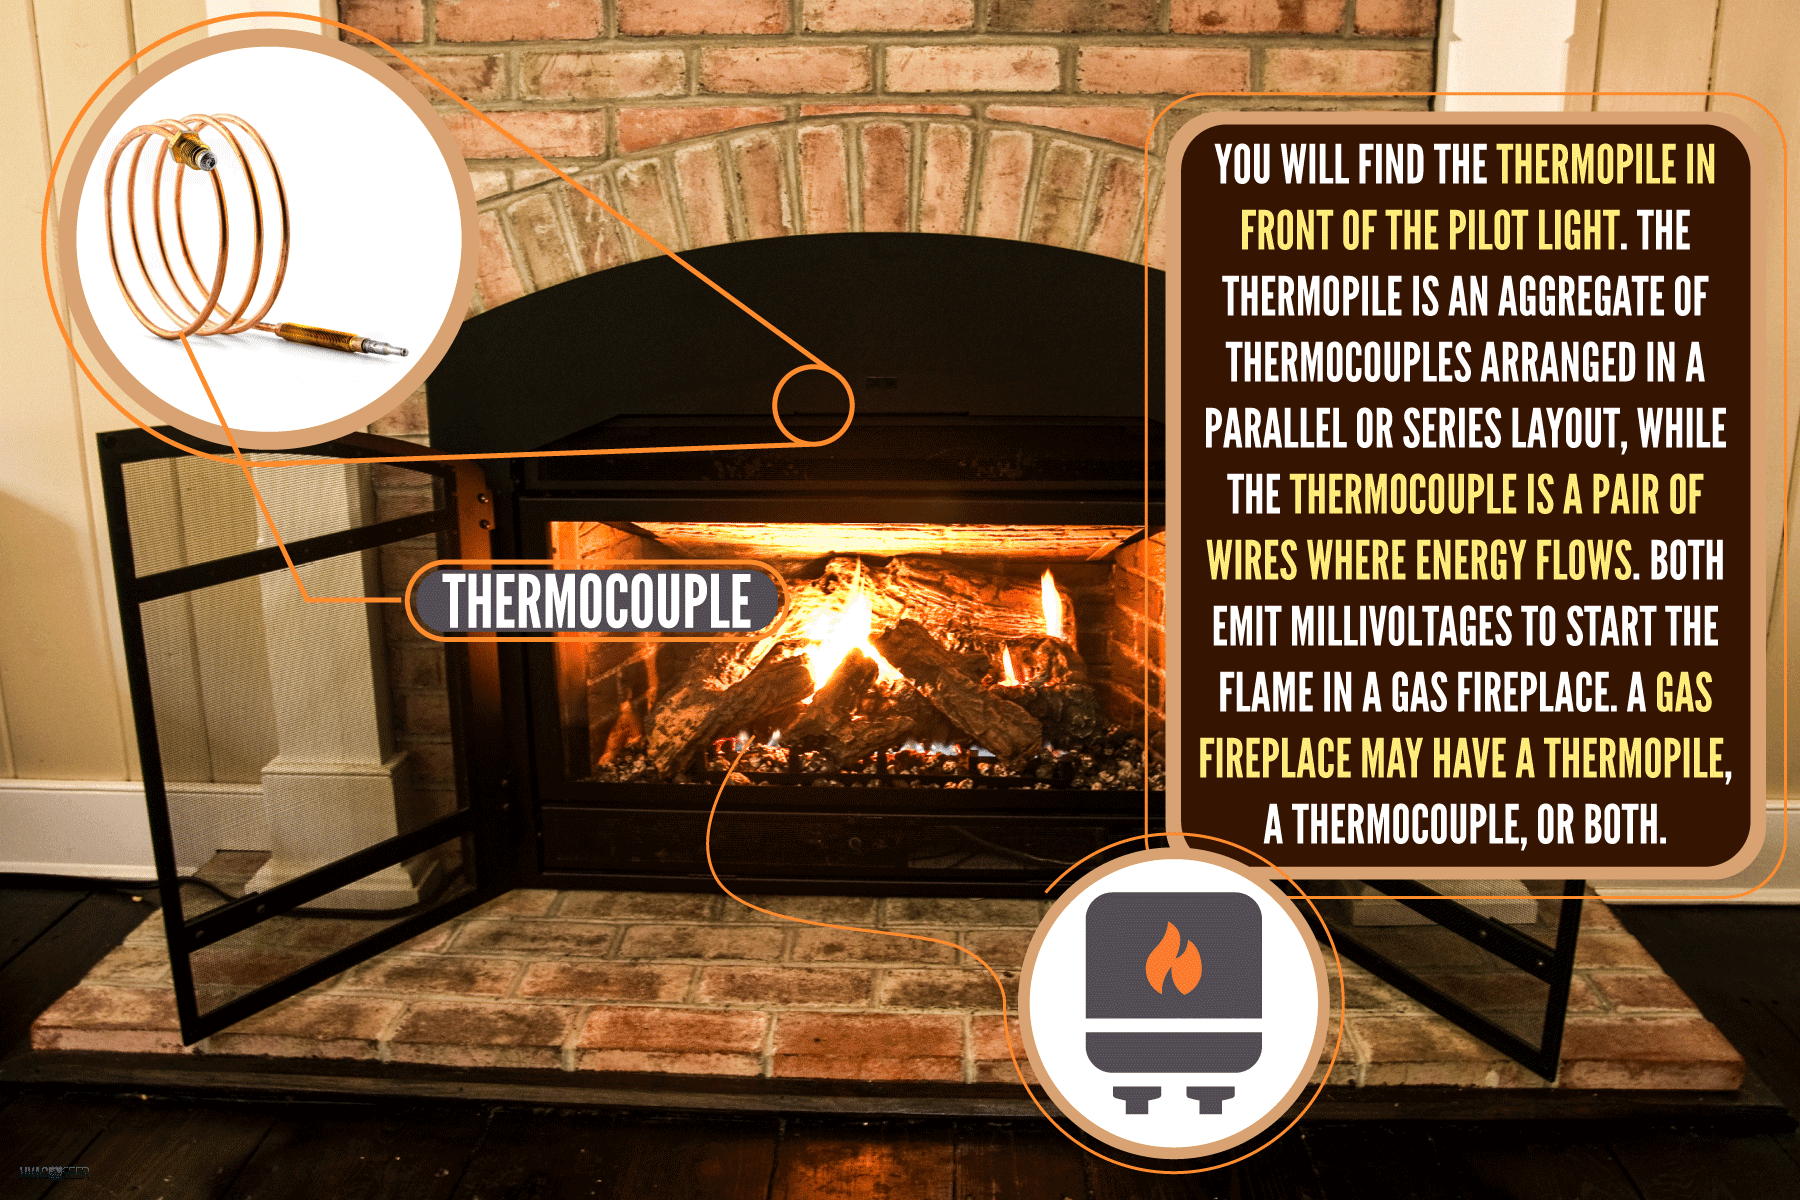 A gas fireplace inside a comfortable home, Where Is The Thermopile [Or Thermocouple] On A Gas Fireplace?